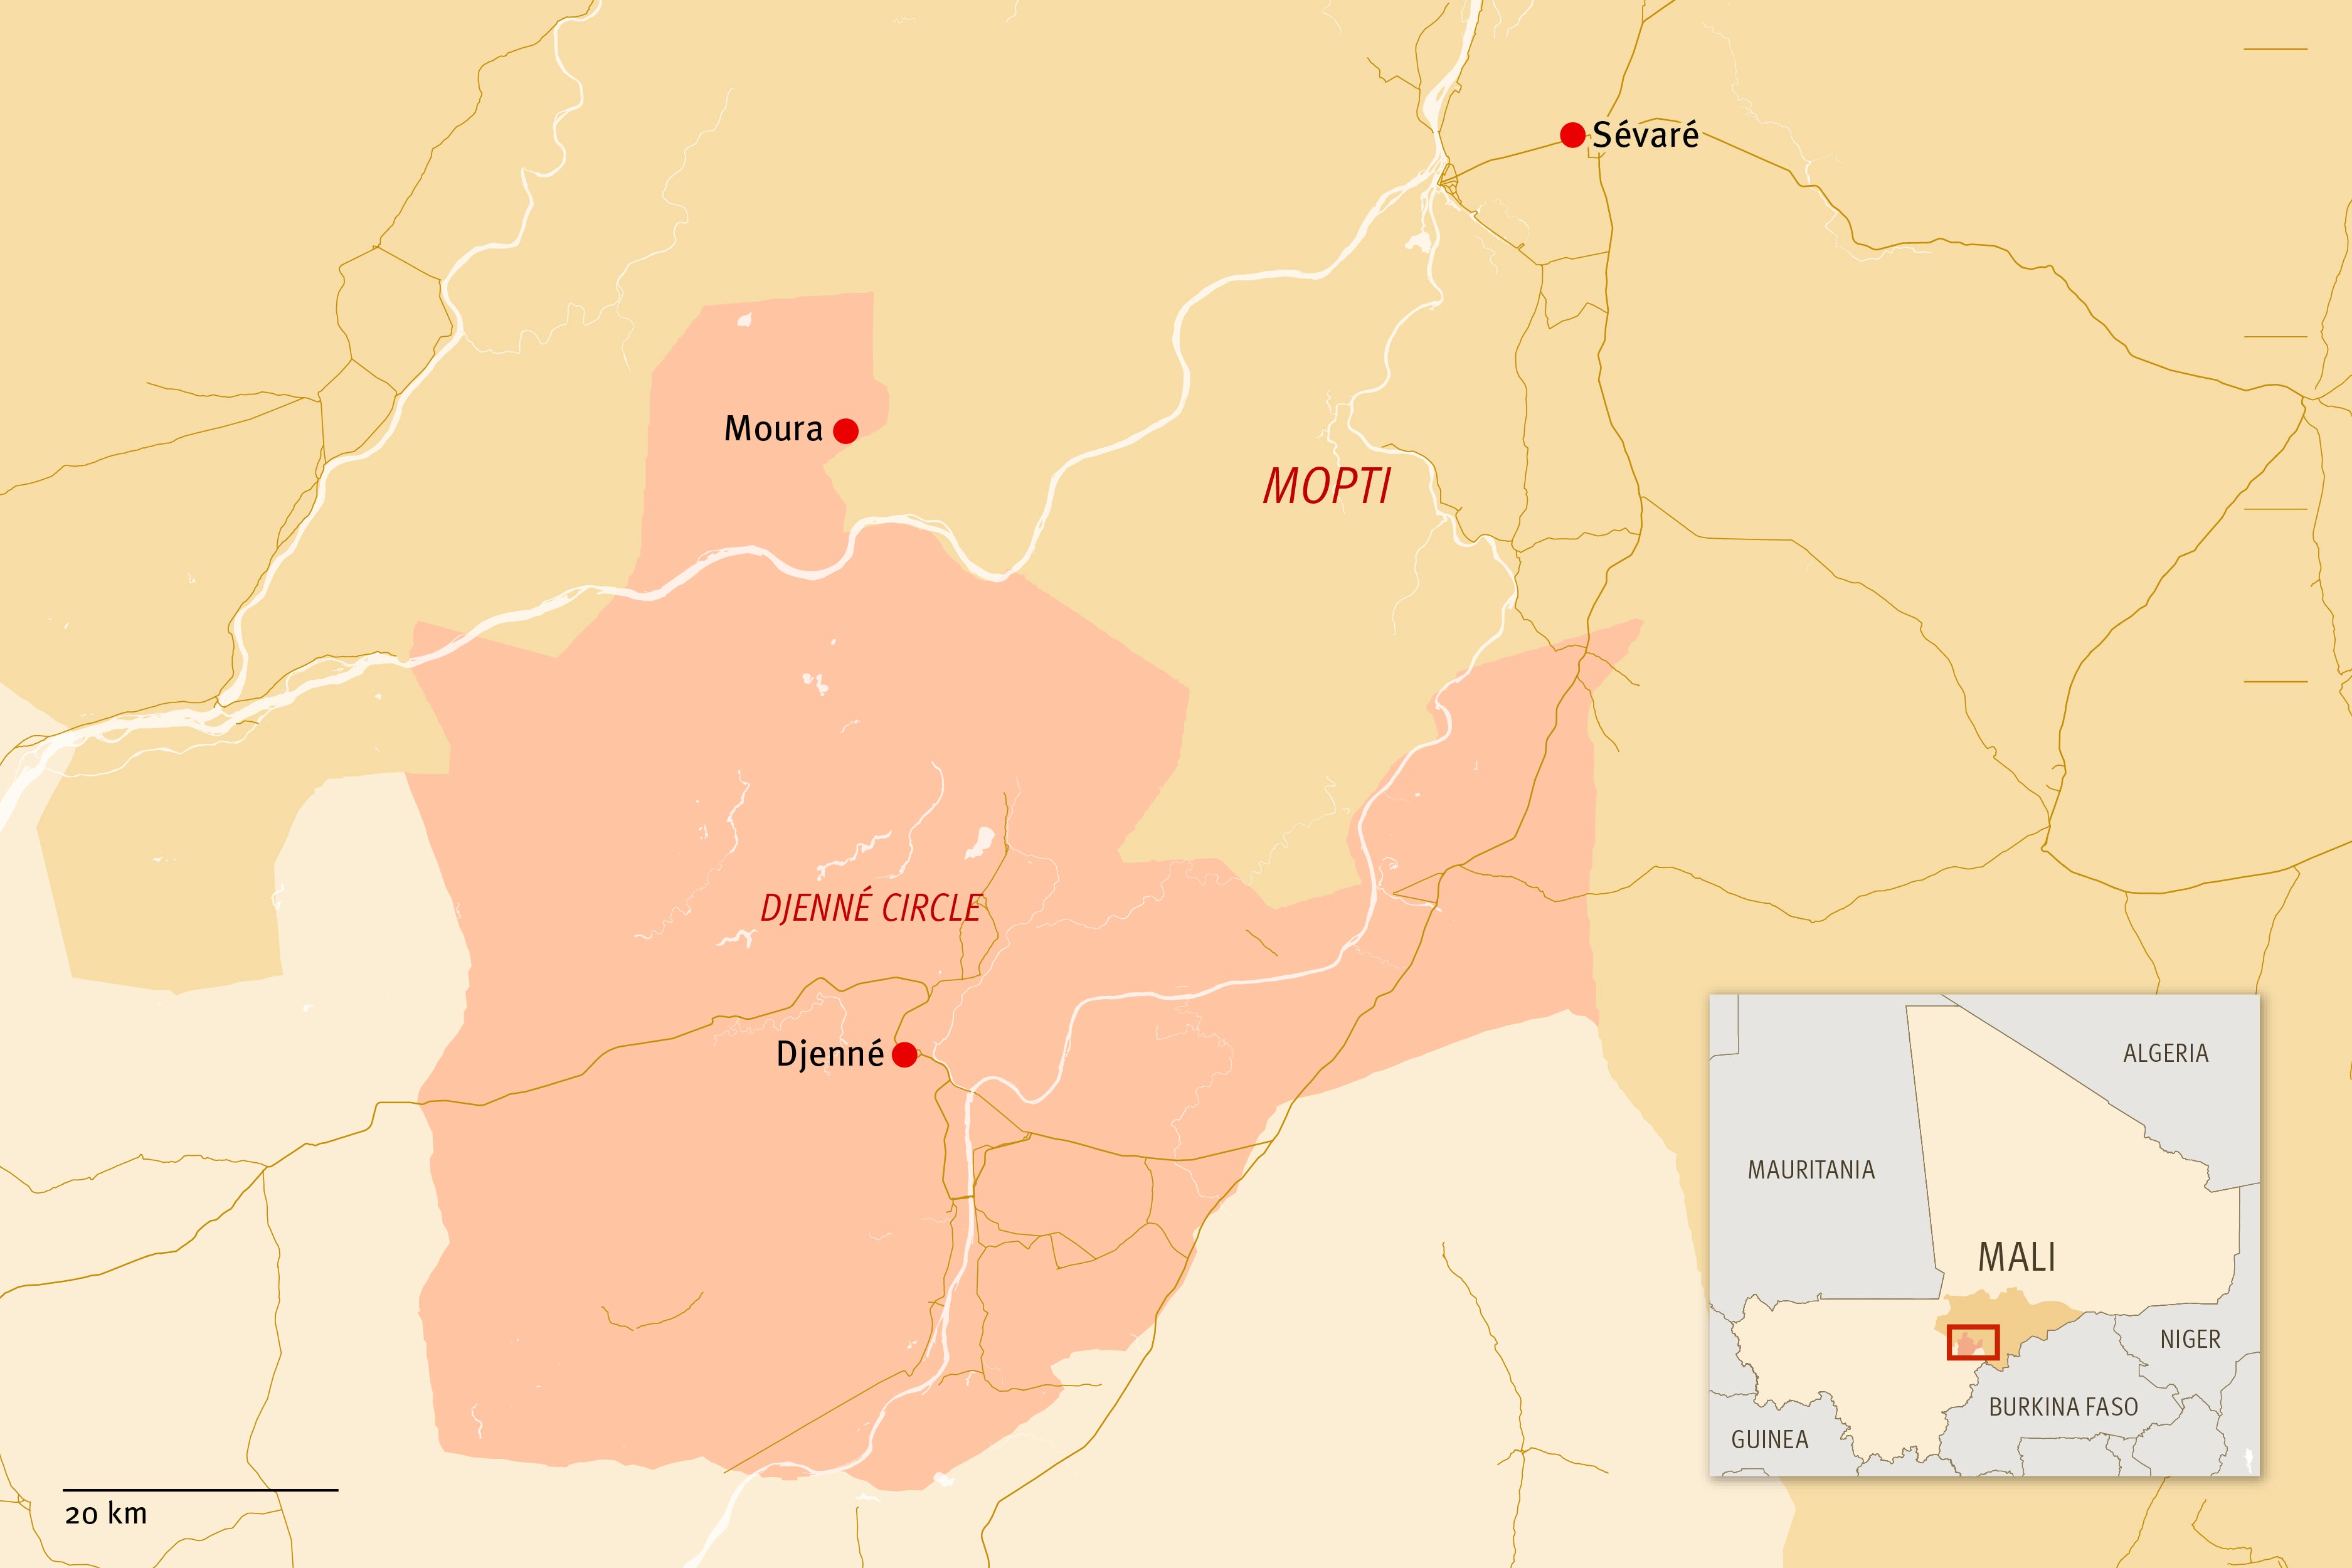 Map of Mali showing location of Moura, site of the massacre, in the center of the country